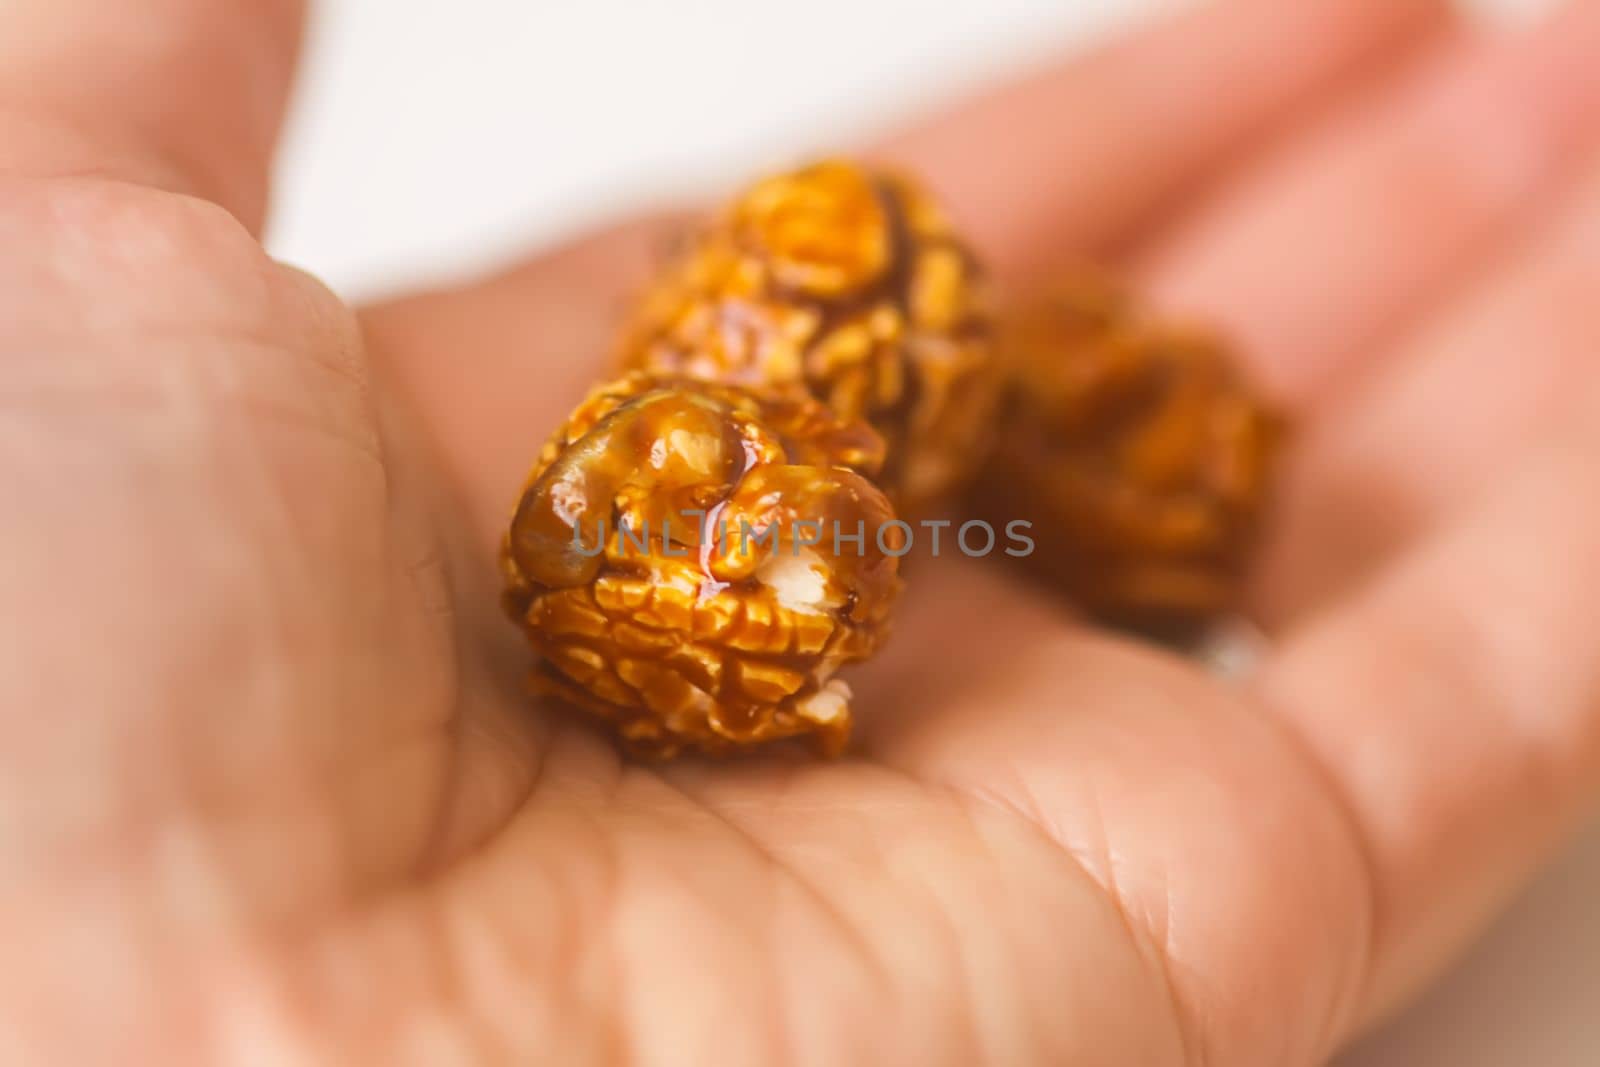 Sweet ready-to-eat popcorn in a hand close up.